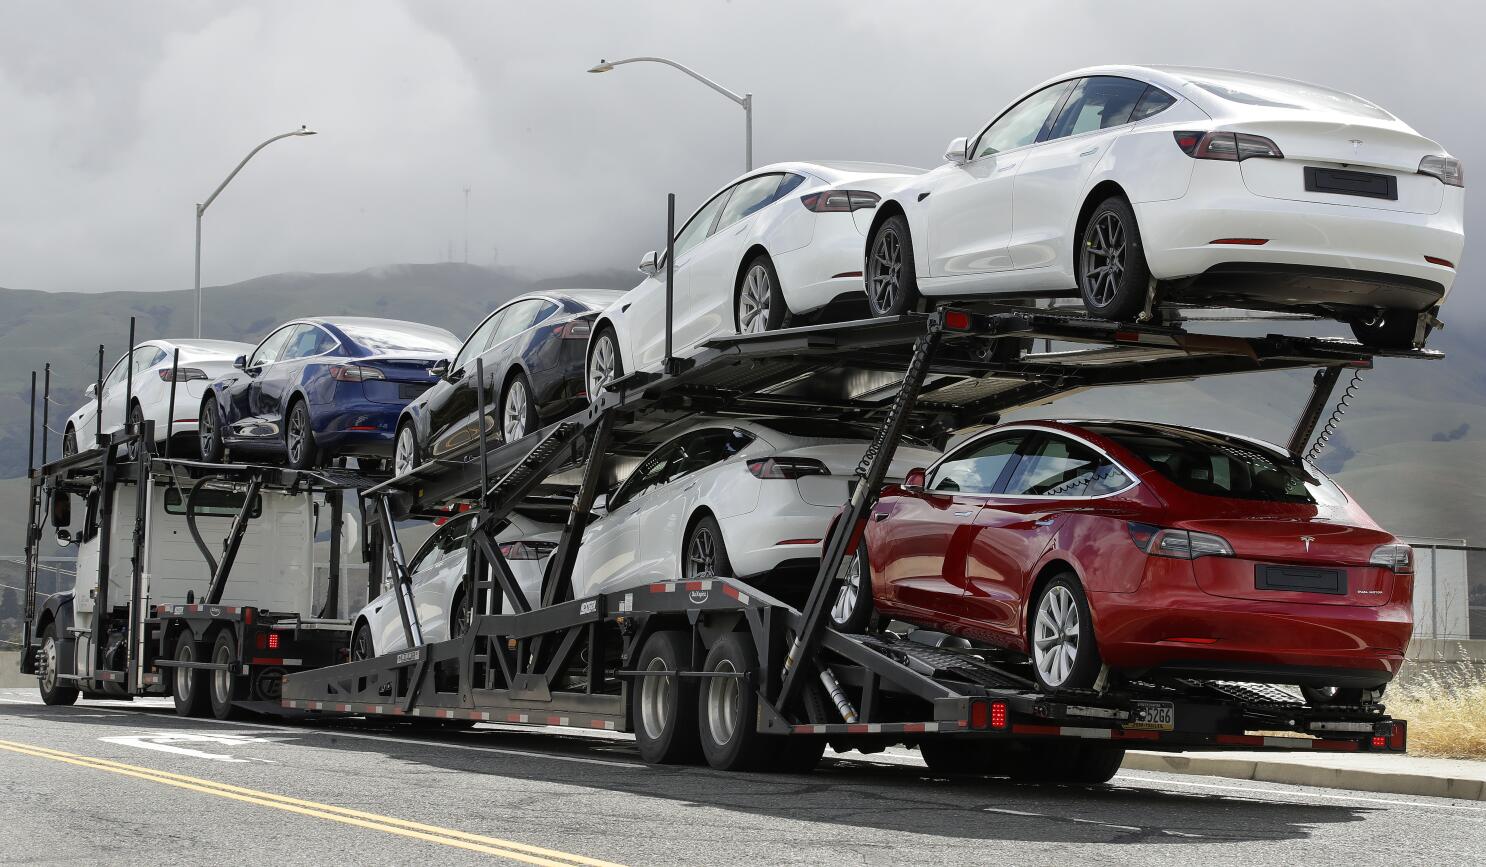 Tesla slashes price again, with brand-new cars now starting under